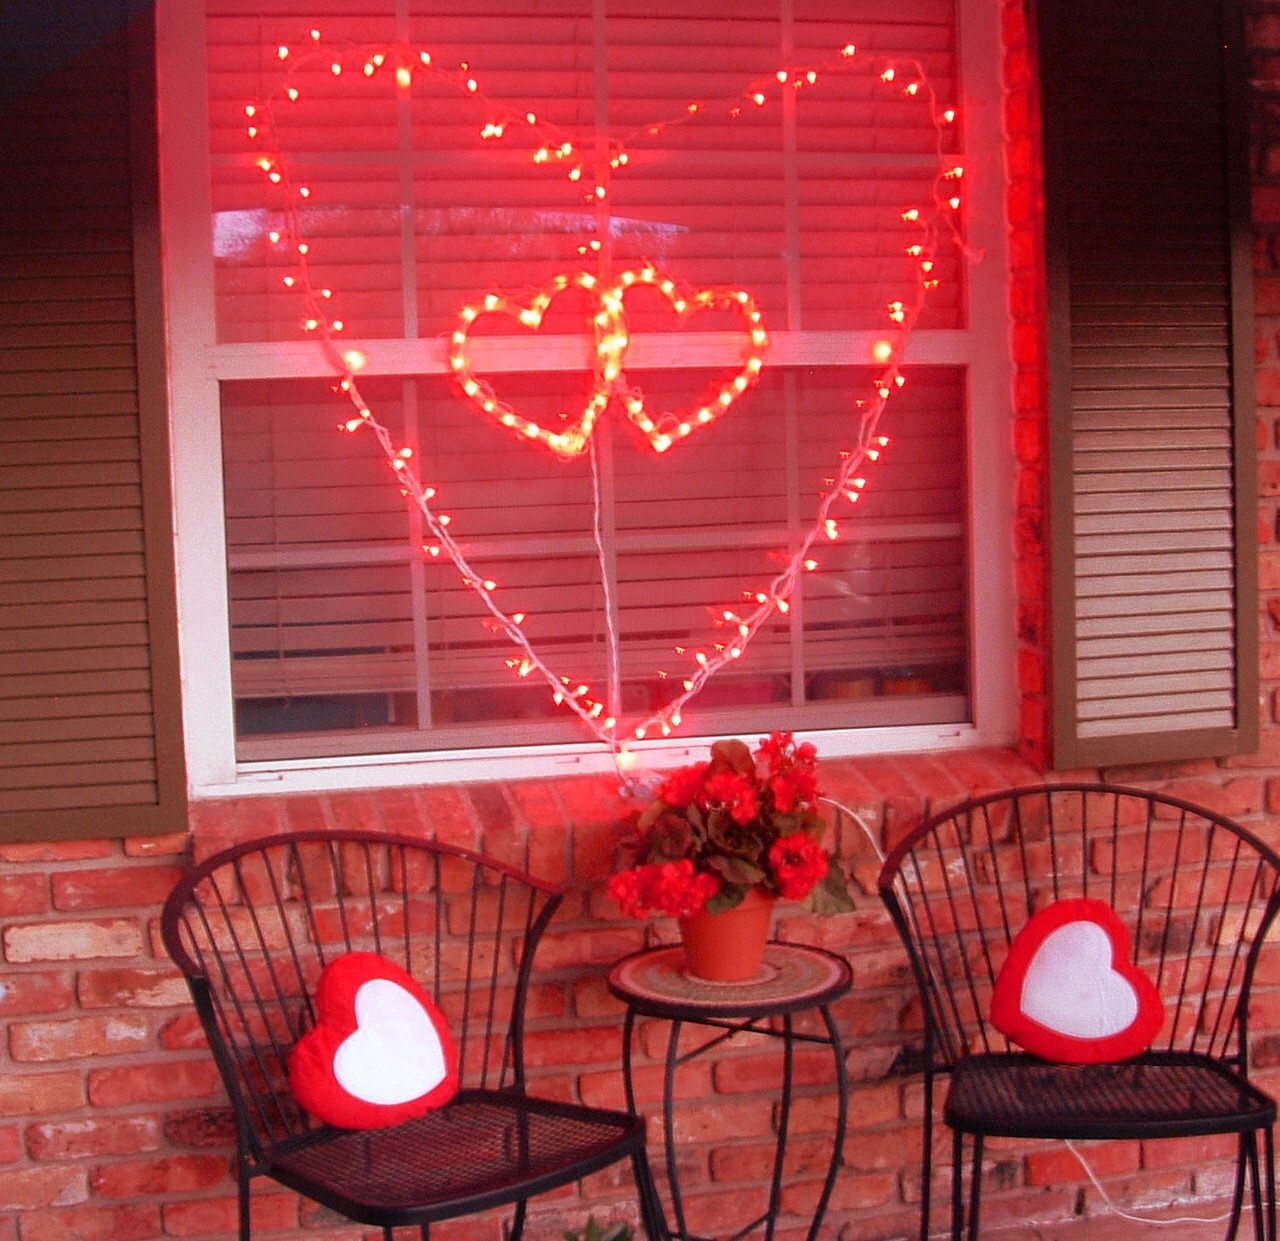 Valentines outdoor decorations image by ˗ˏˋ ˊˎ˗ on lovely | Valentine's ...